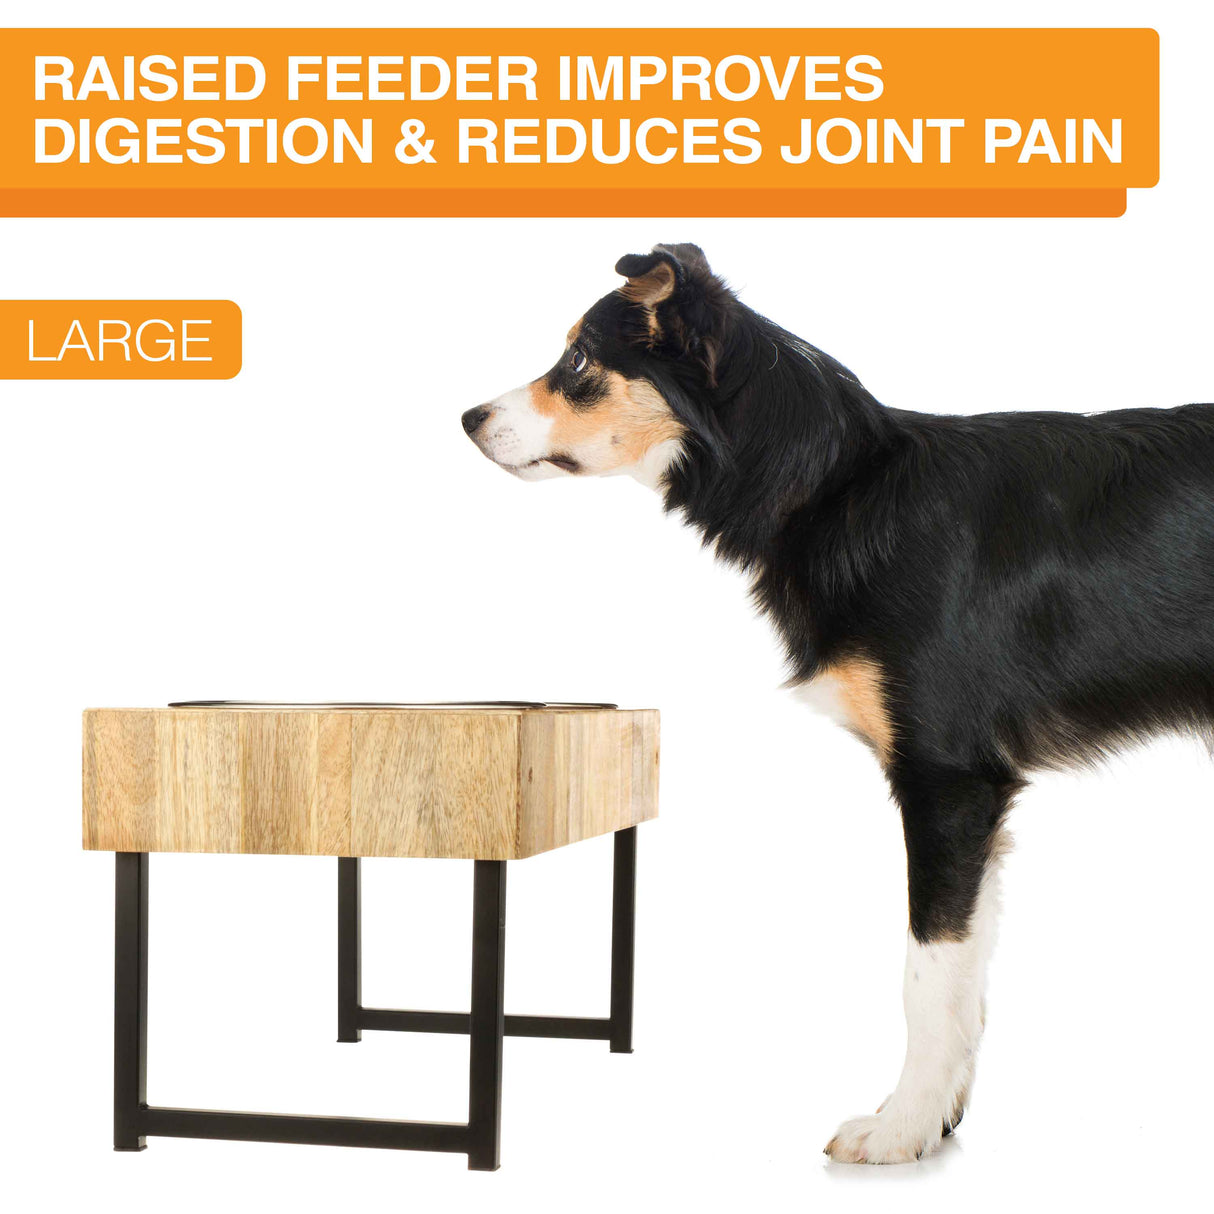 Raised feeder improves digestion and reduces joint pain